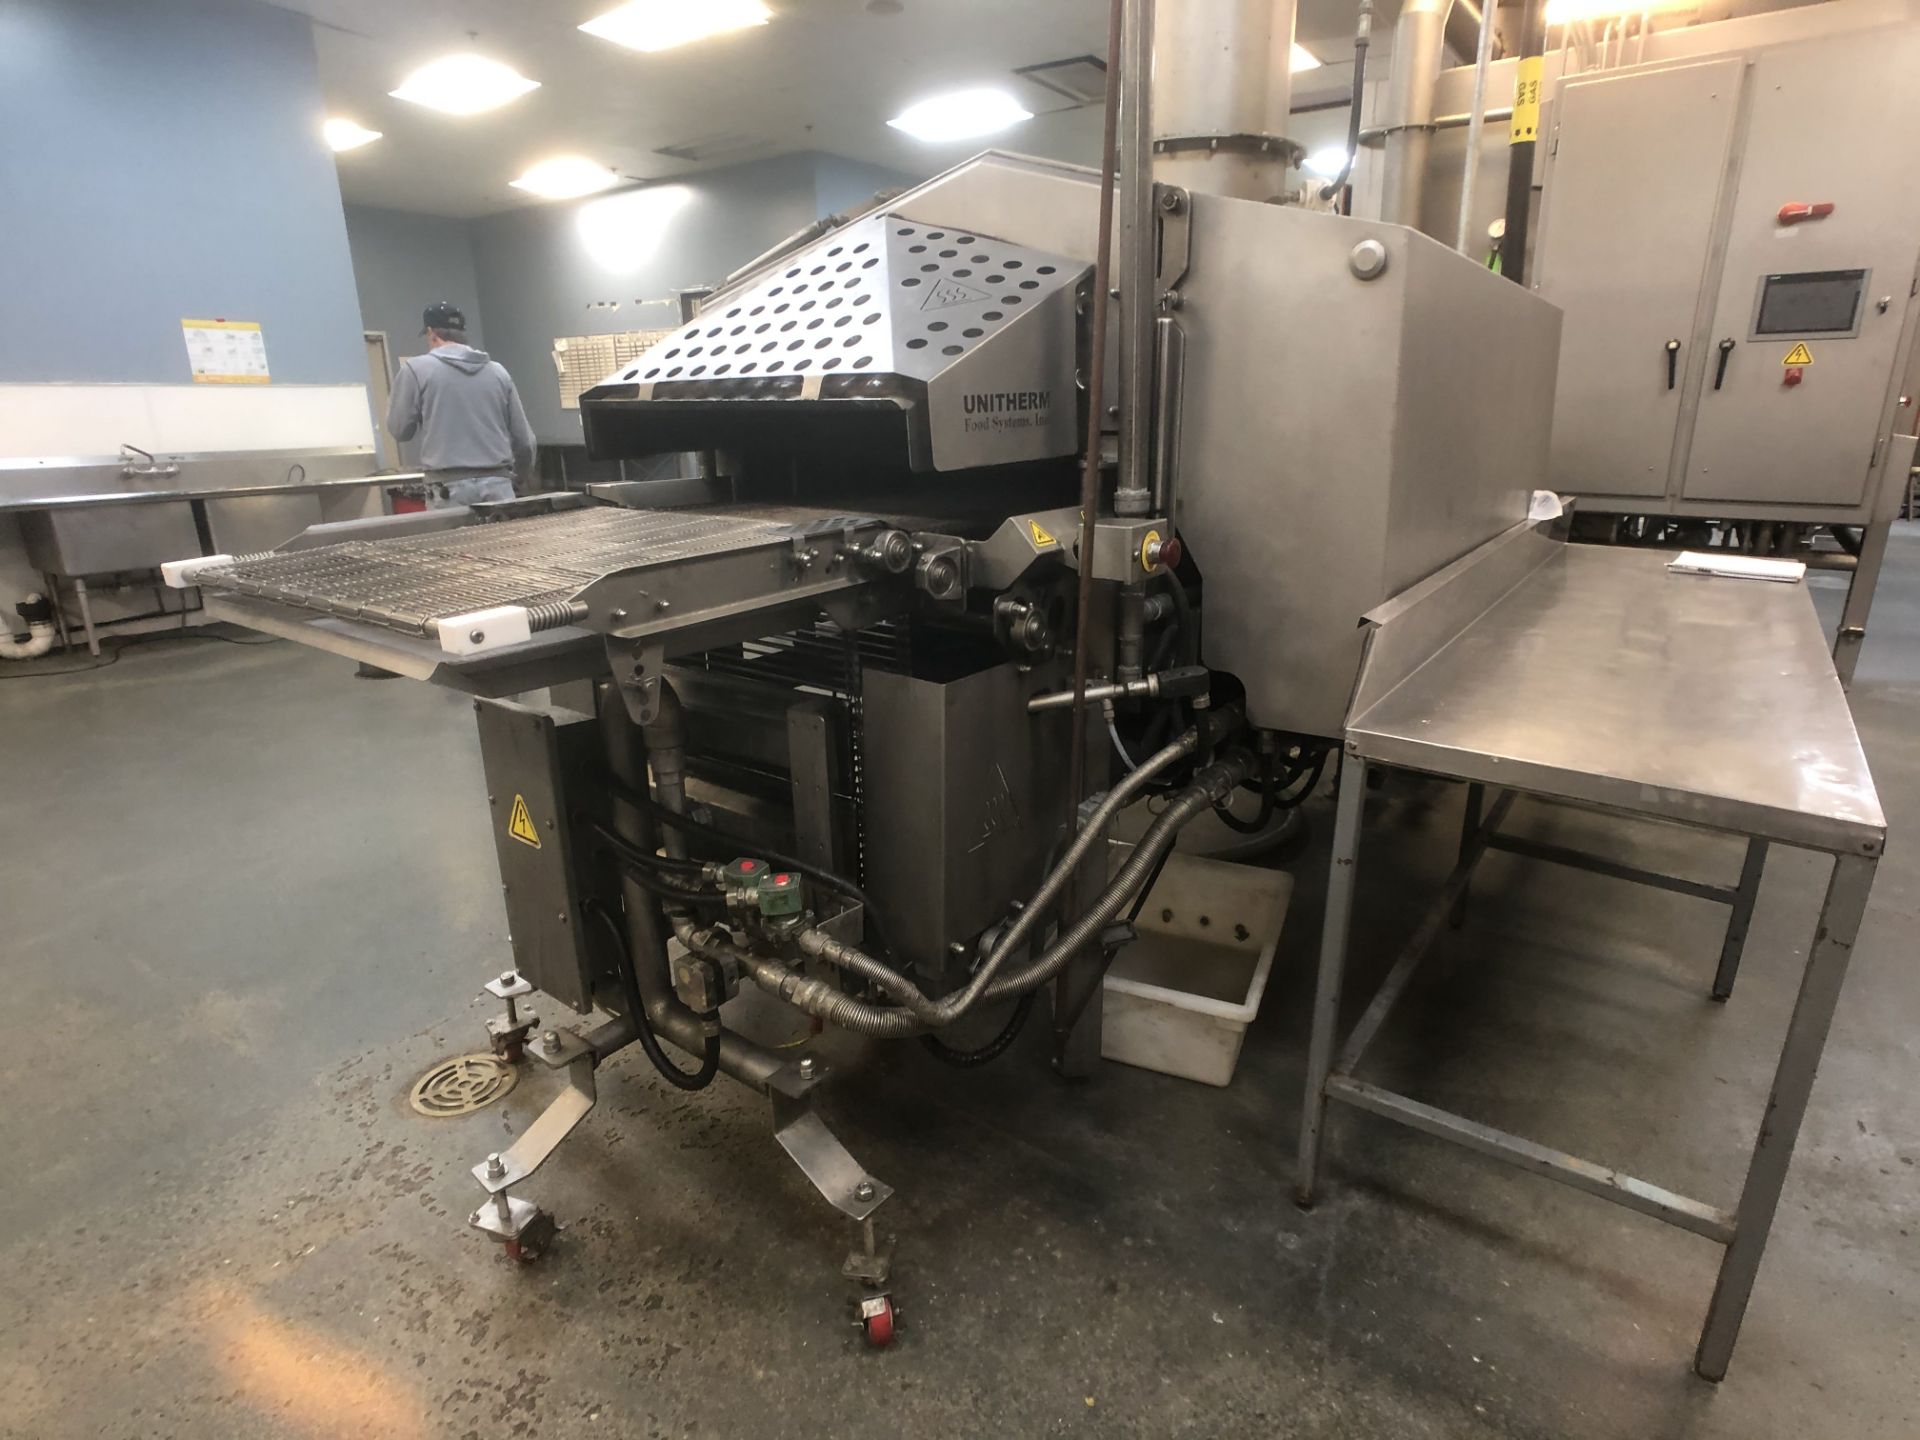 2019 Unitherm Food Systems 24" Flame Grill with Preheat, Model FG-24-8B-P, S/N FLGR-2485, Includes - Image 10 of 19